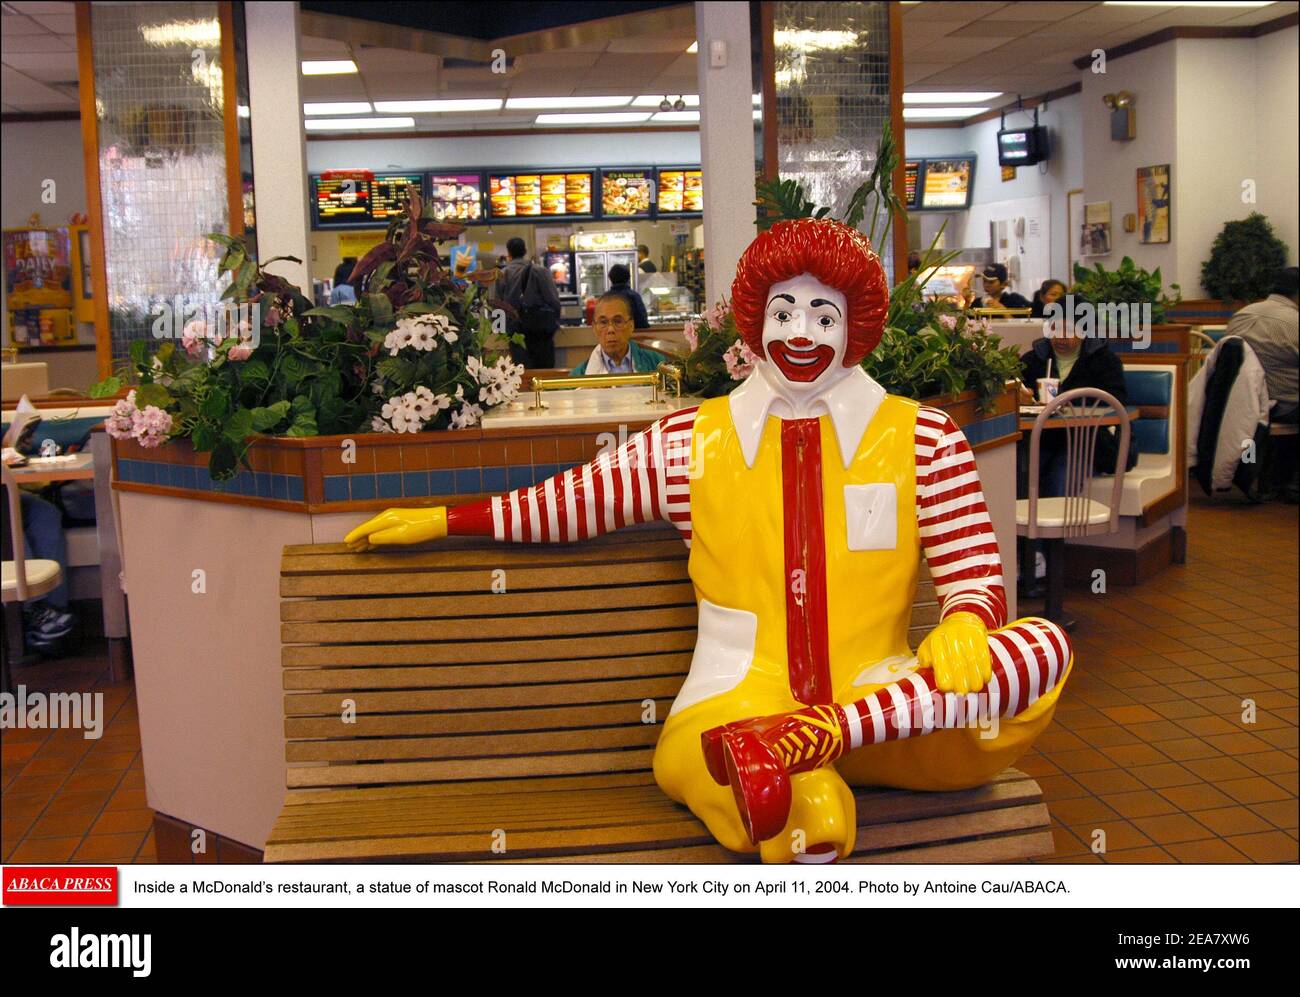 Inside a McDonald's restaurant, a statue of mascot Ronald McDonald in New York City on April 11, 2004. Photo by Antoine Cau/ABACA. Stock Photo